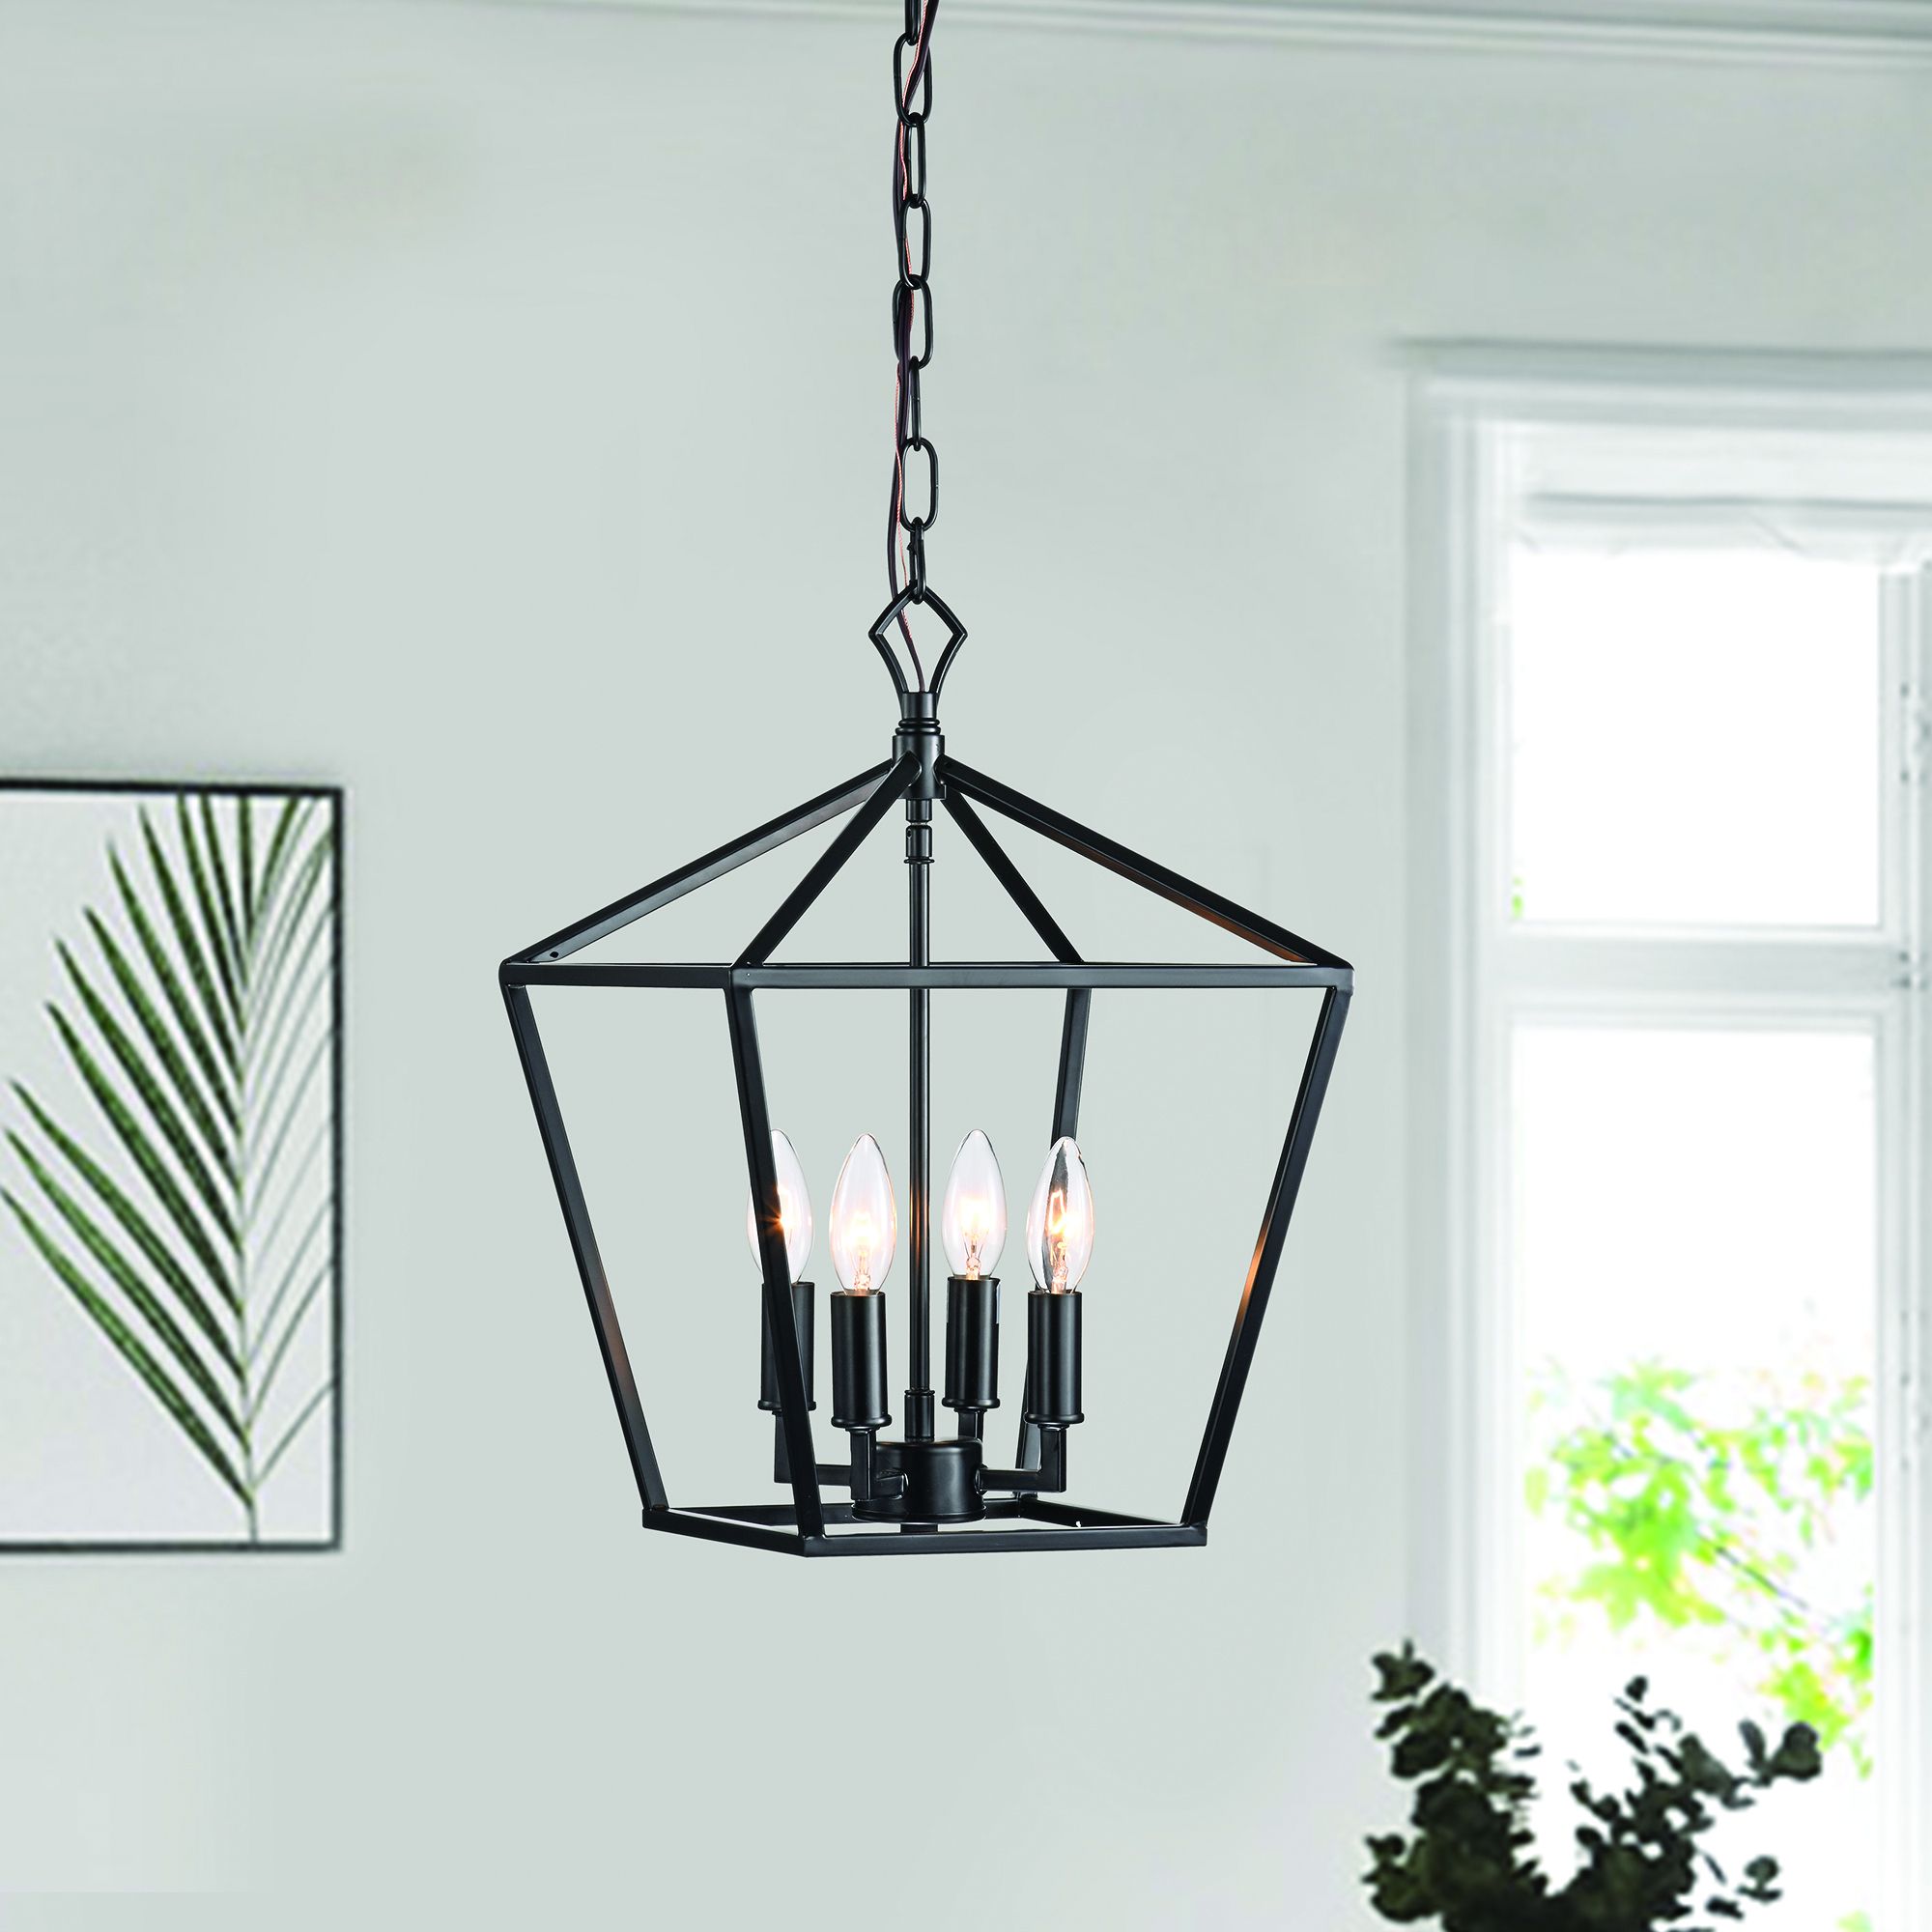 4 Light Matte Black Lantern Pendant Chandelier 16 In With Nickle Or Black  Sleeve – Edvivi Lighting Intended For Well Known Flat Black Lantern Chandeliers (View 8 of 15)